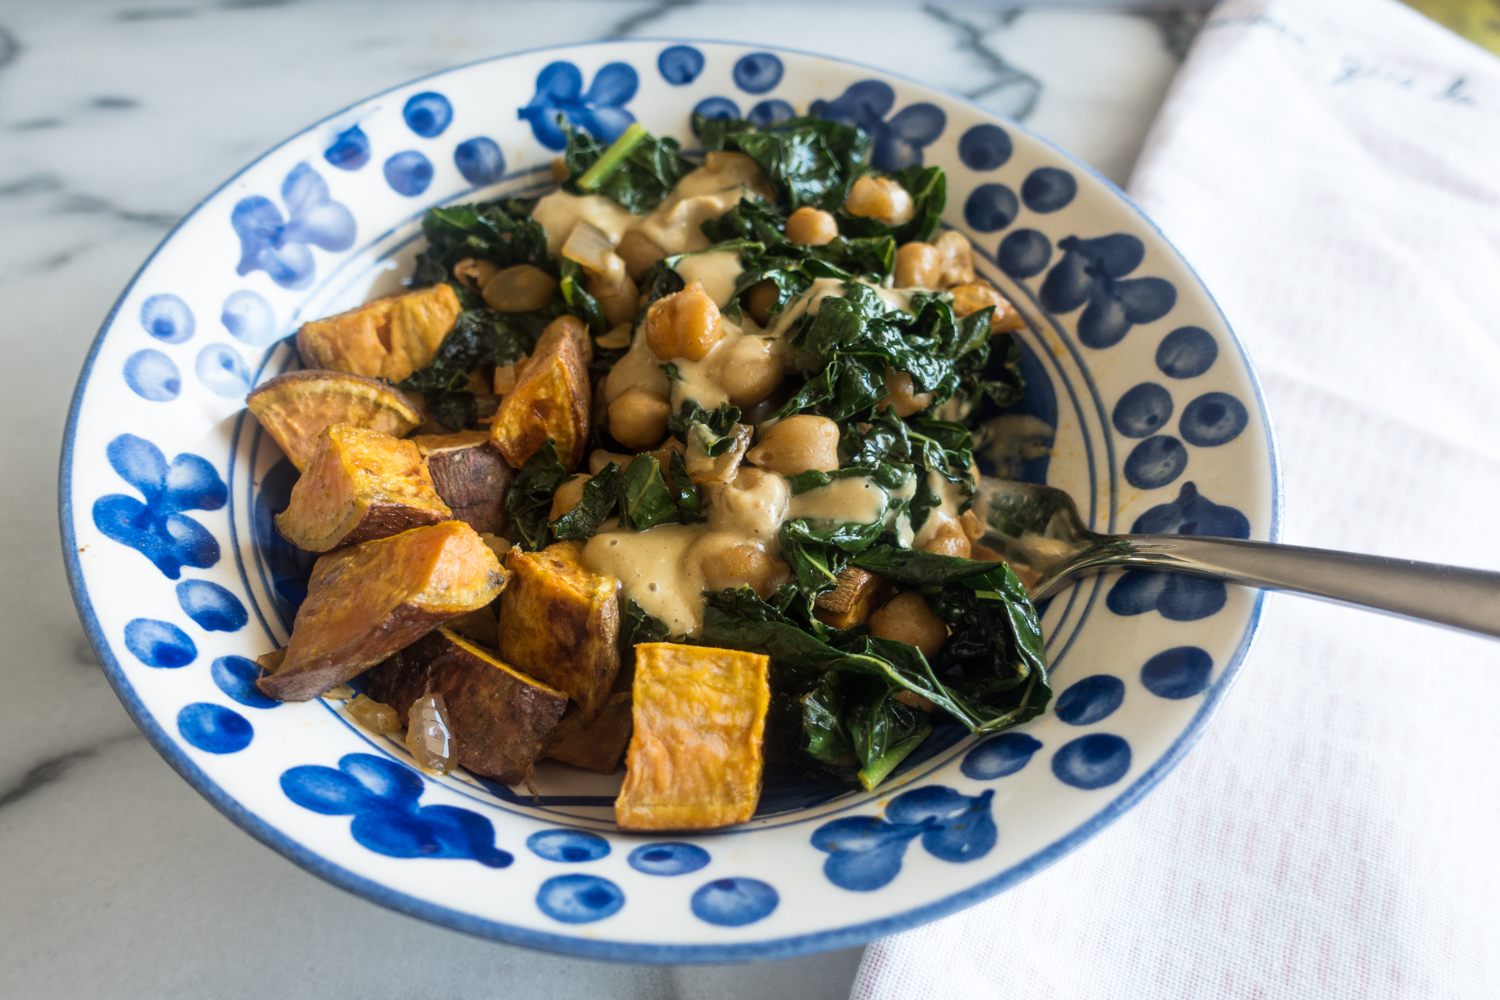 Smoky Kale and Chickpeas with Miso Peanut Drizzle is a quick and delicious recipe from Bold Vegan by Celine Steen.